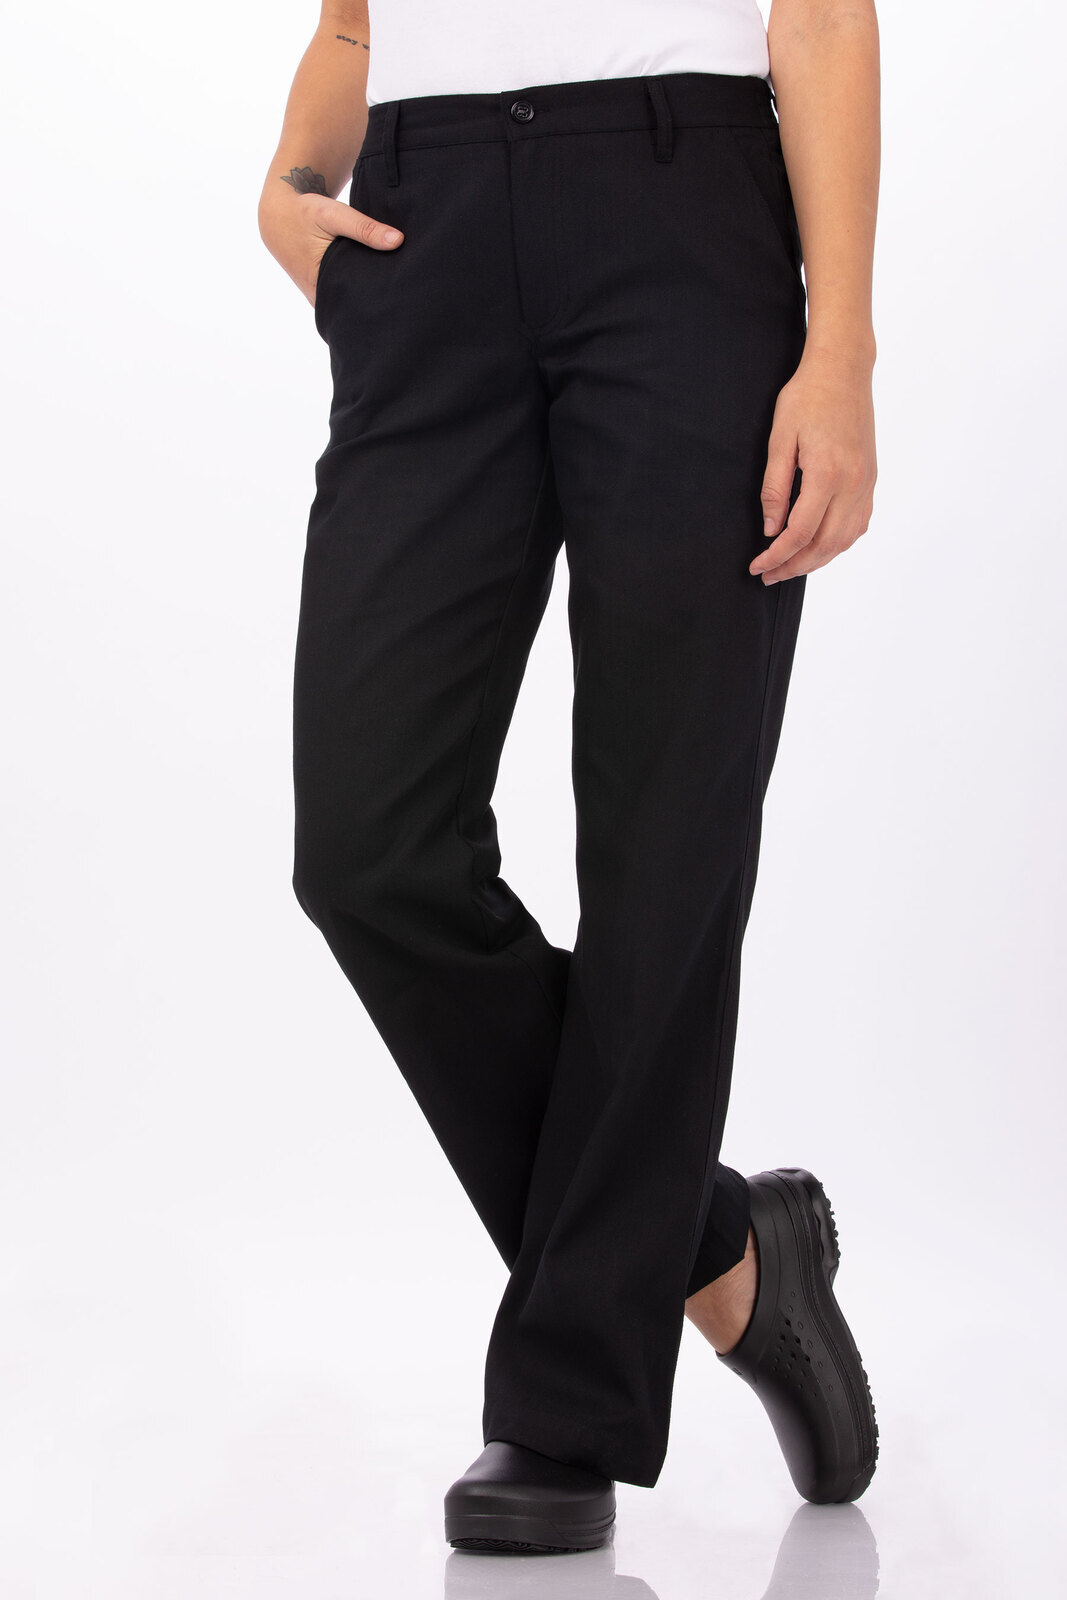 Chef Works Professional Women's Black Chef Pants